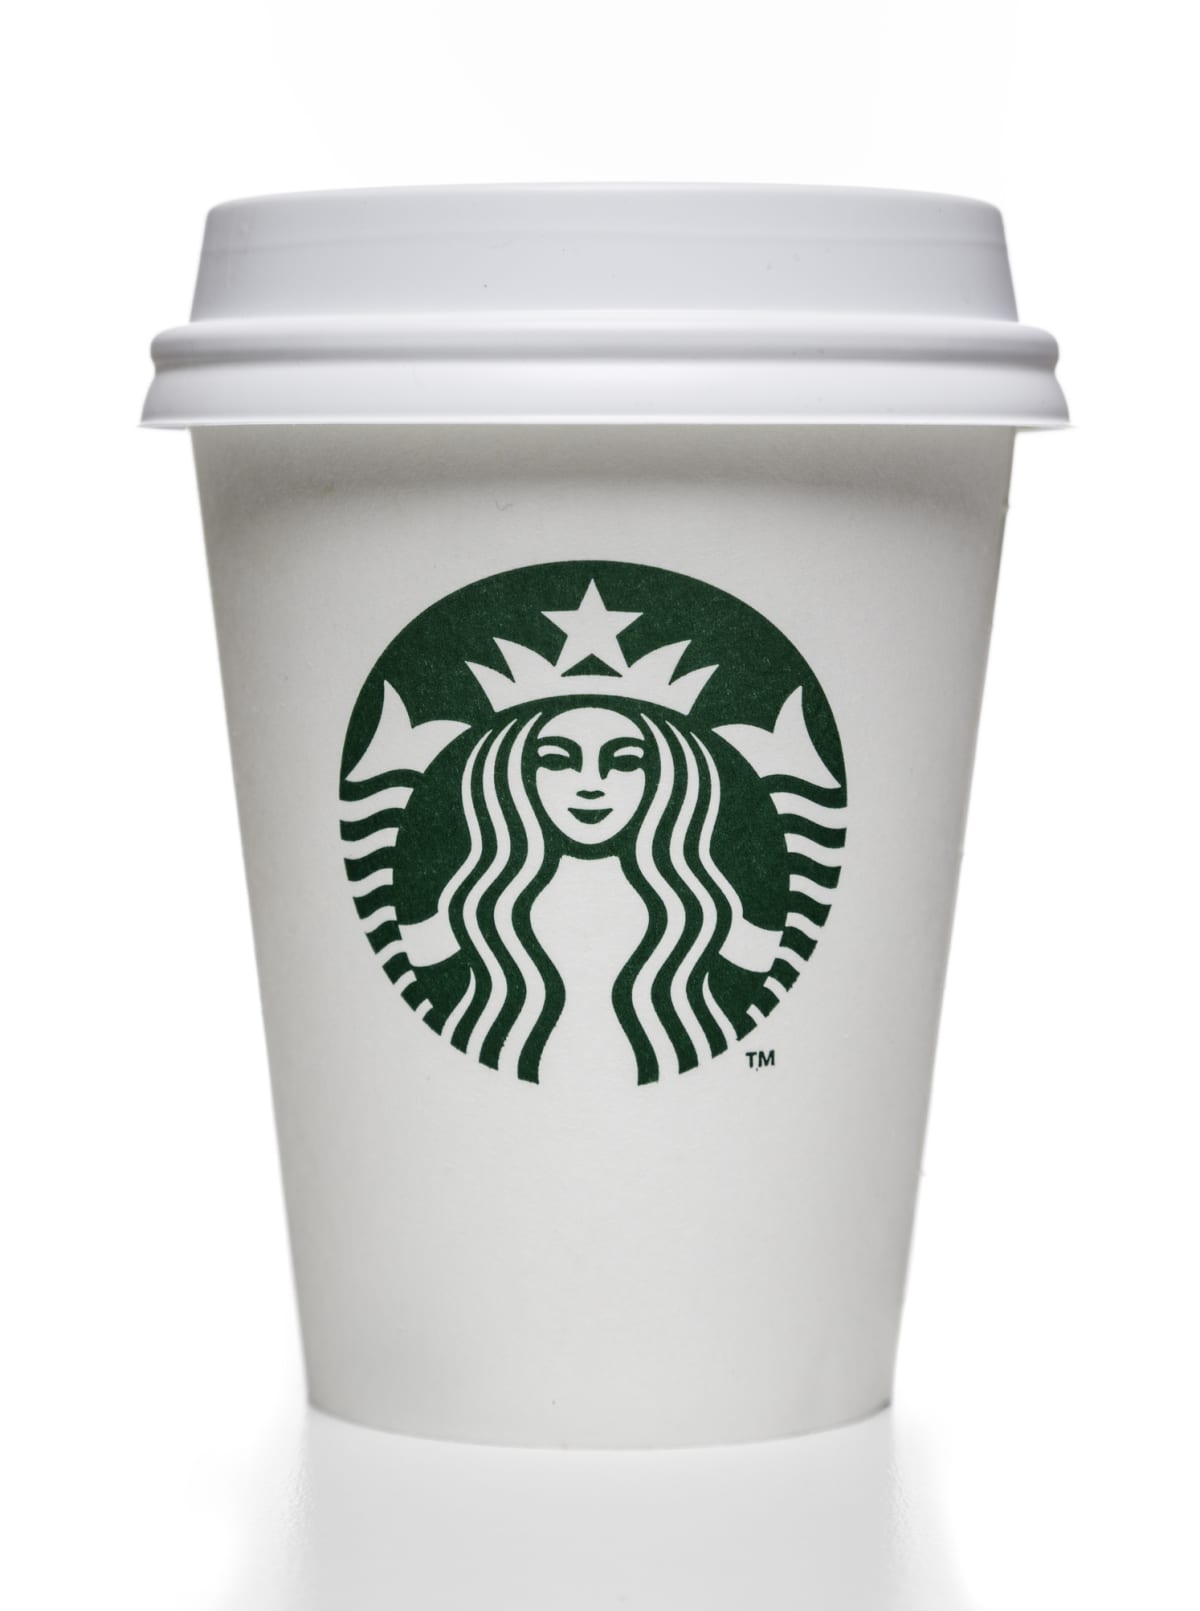 Starbucks cup on a white background